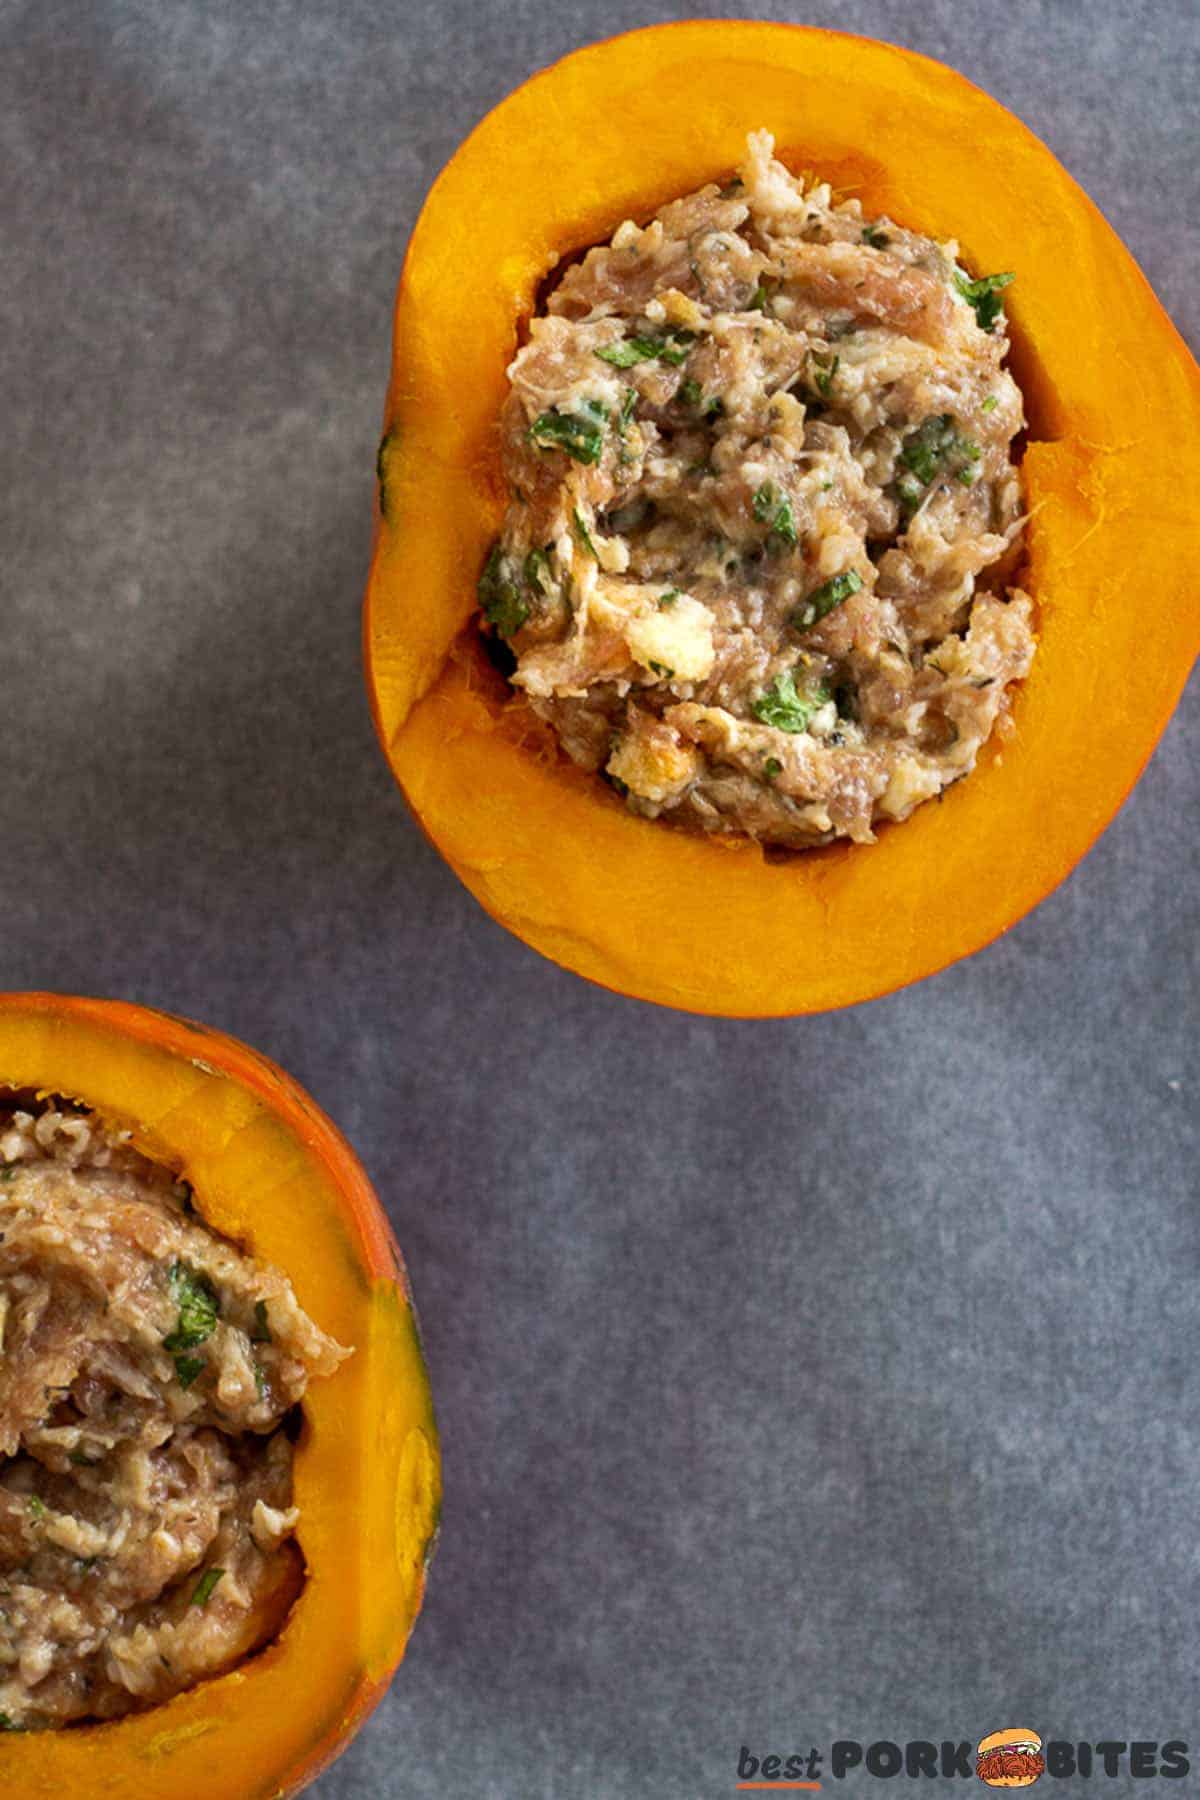 raw squash halves on a baking sheet with uncooked pork sausage stuffing